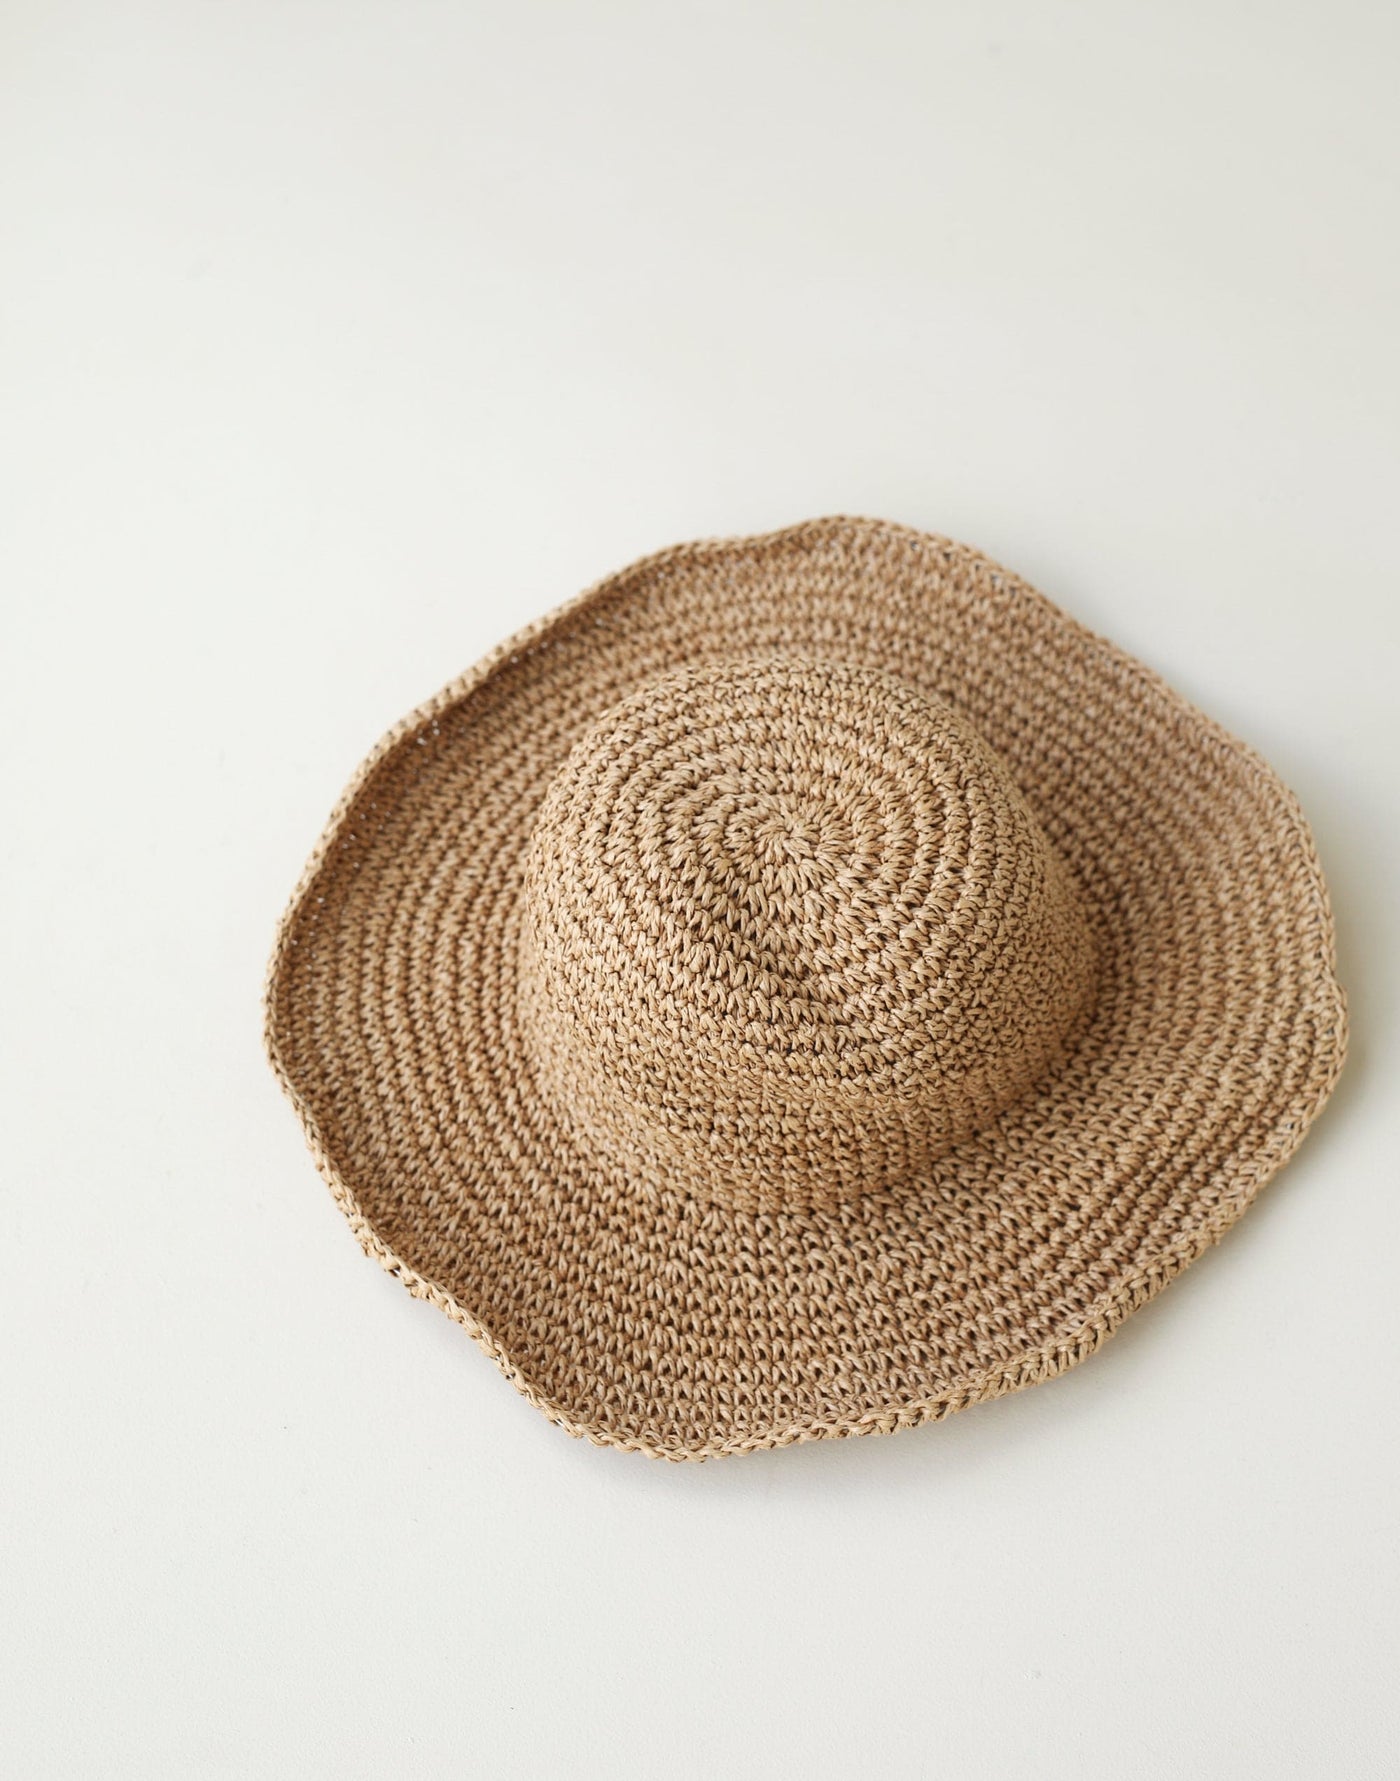 Cove Straw Hat (Caramel) - Woven Bucket Hat - Women's Accessories - Charcoal Clothing